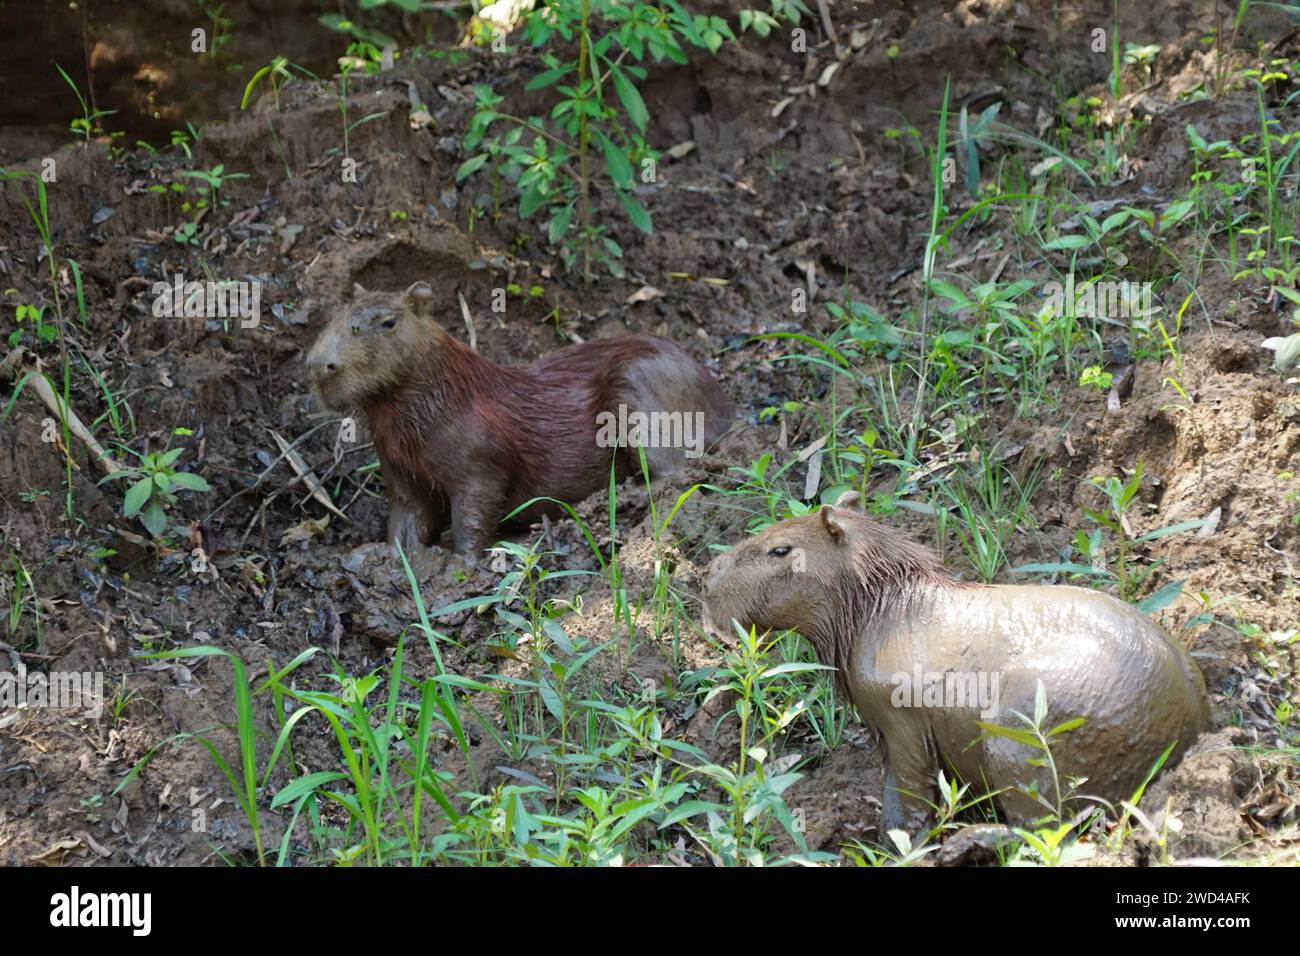 Capybara Amazon Forest. Covered in mud living in its natural habitat surround by plants at Tambopata in the Amazon of Peru Stock Photo